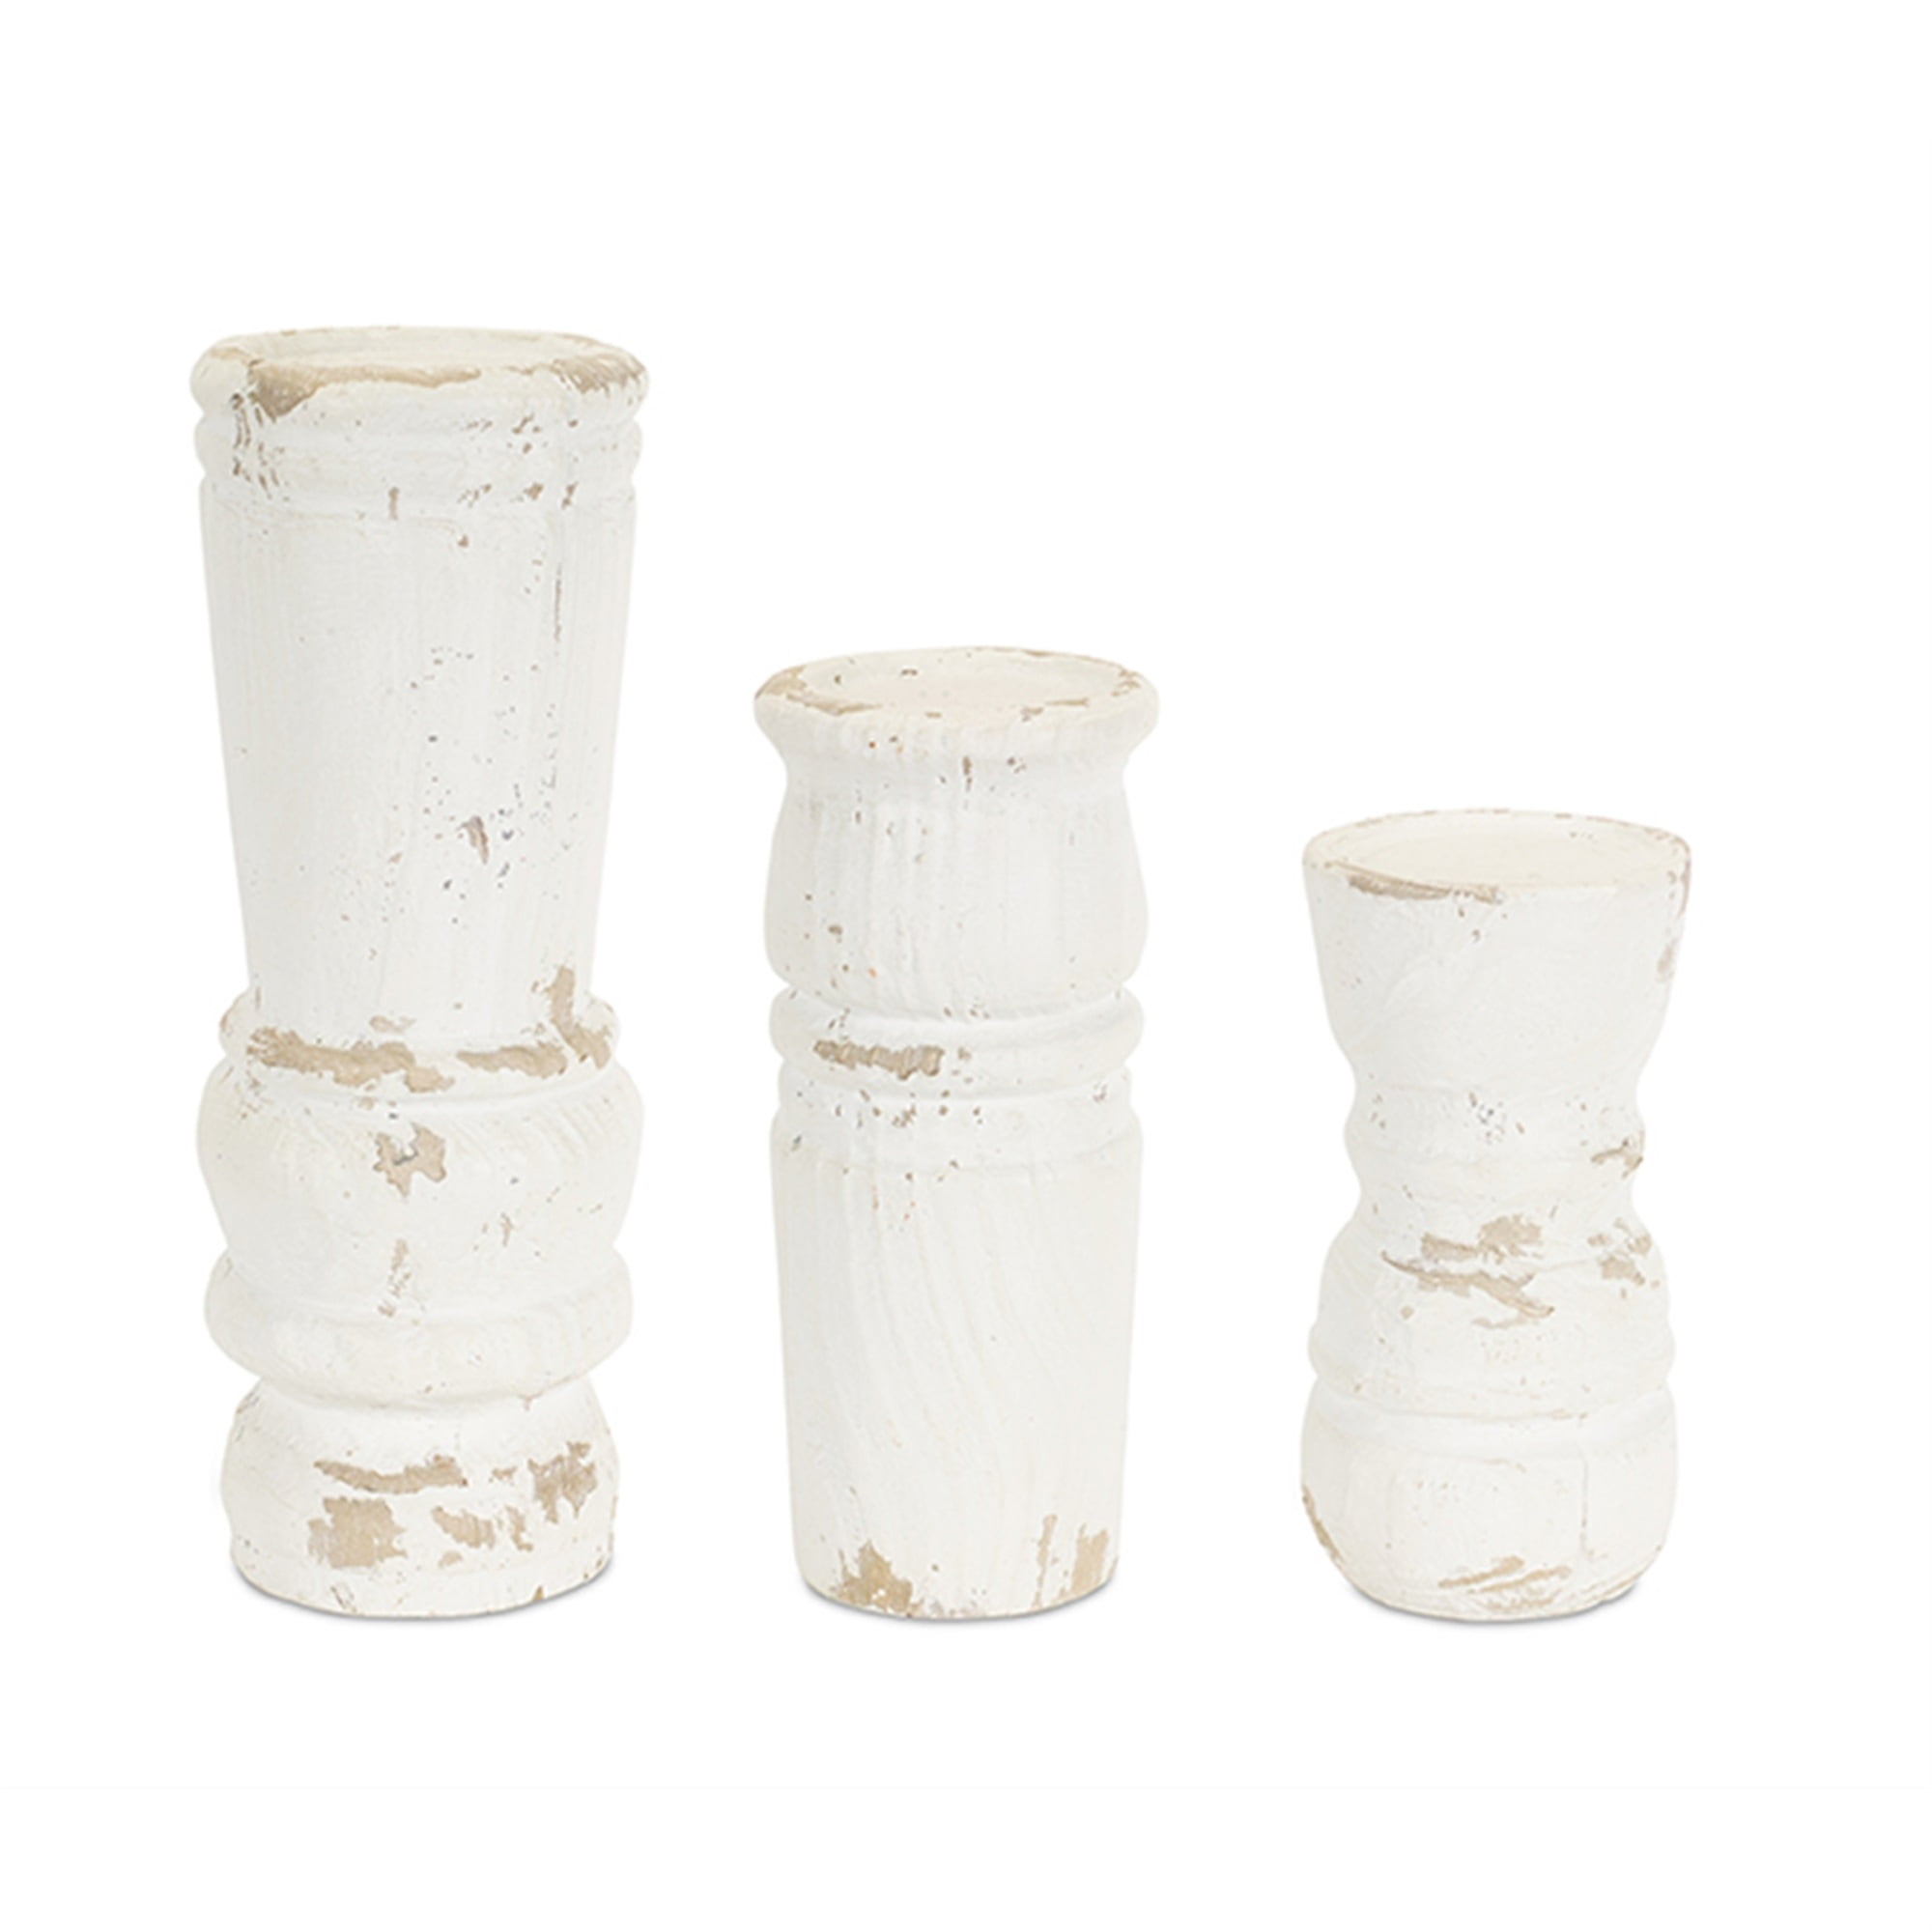 Candle Holder (Set of 3) 10.5"H, 11.5"H, 15"H Resin